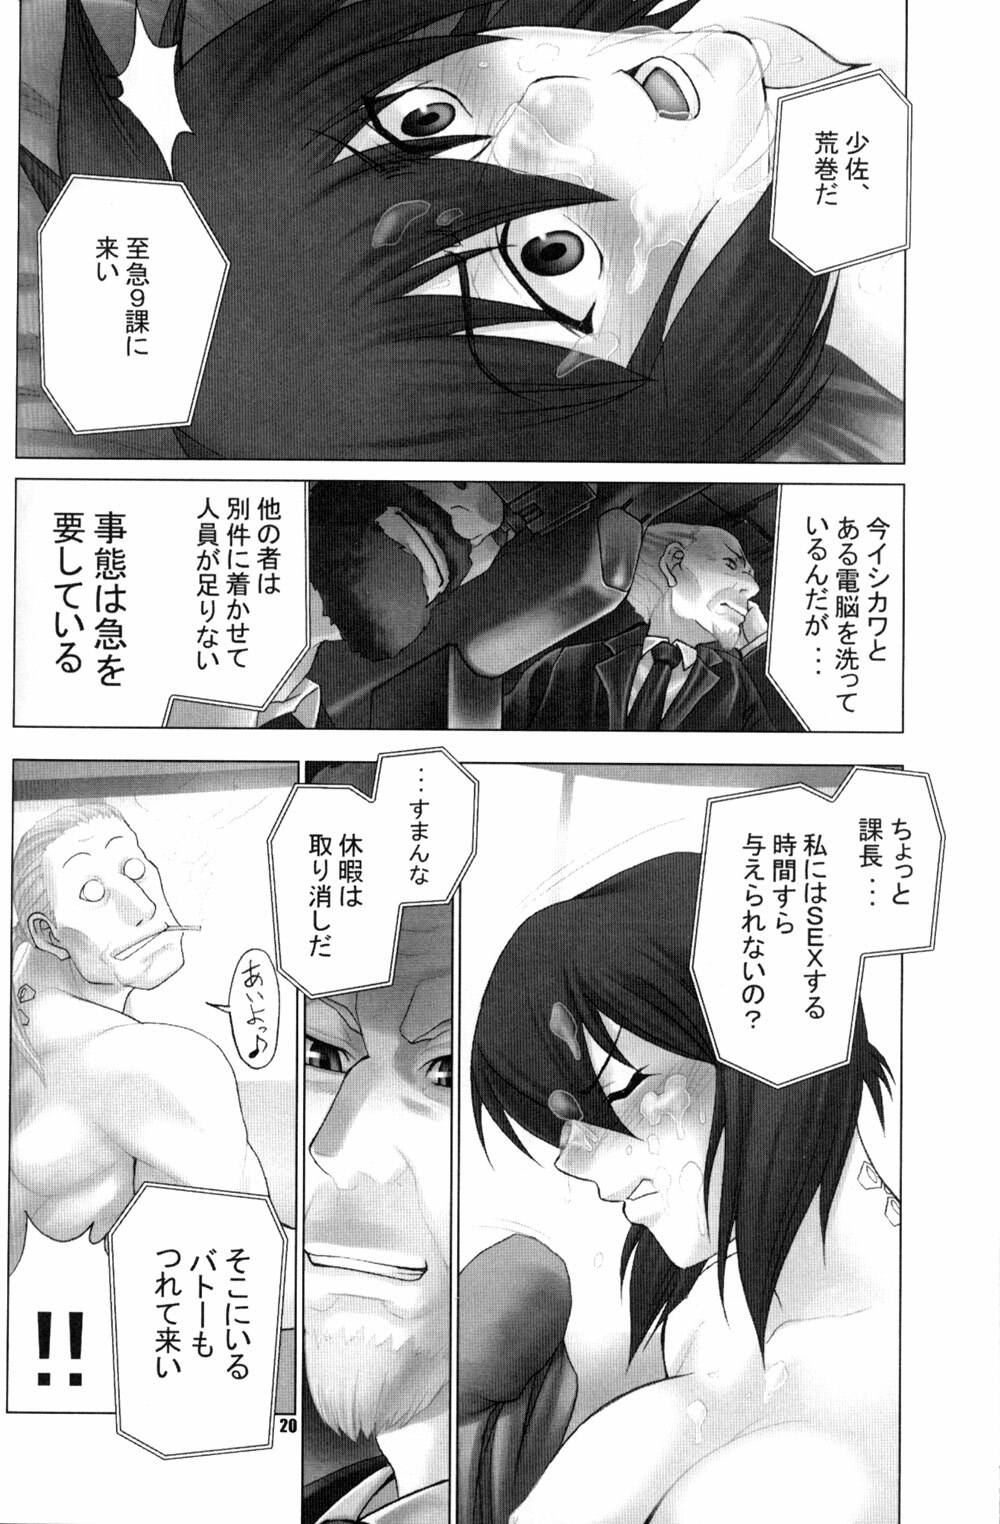 (C66) [Runners High (Chiba Toshirou)] CELLULOID - ACME (Ghost in the Shell) page 20 full